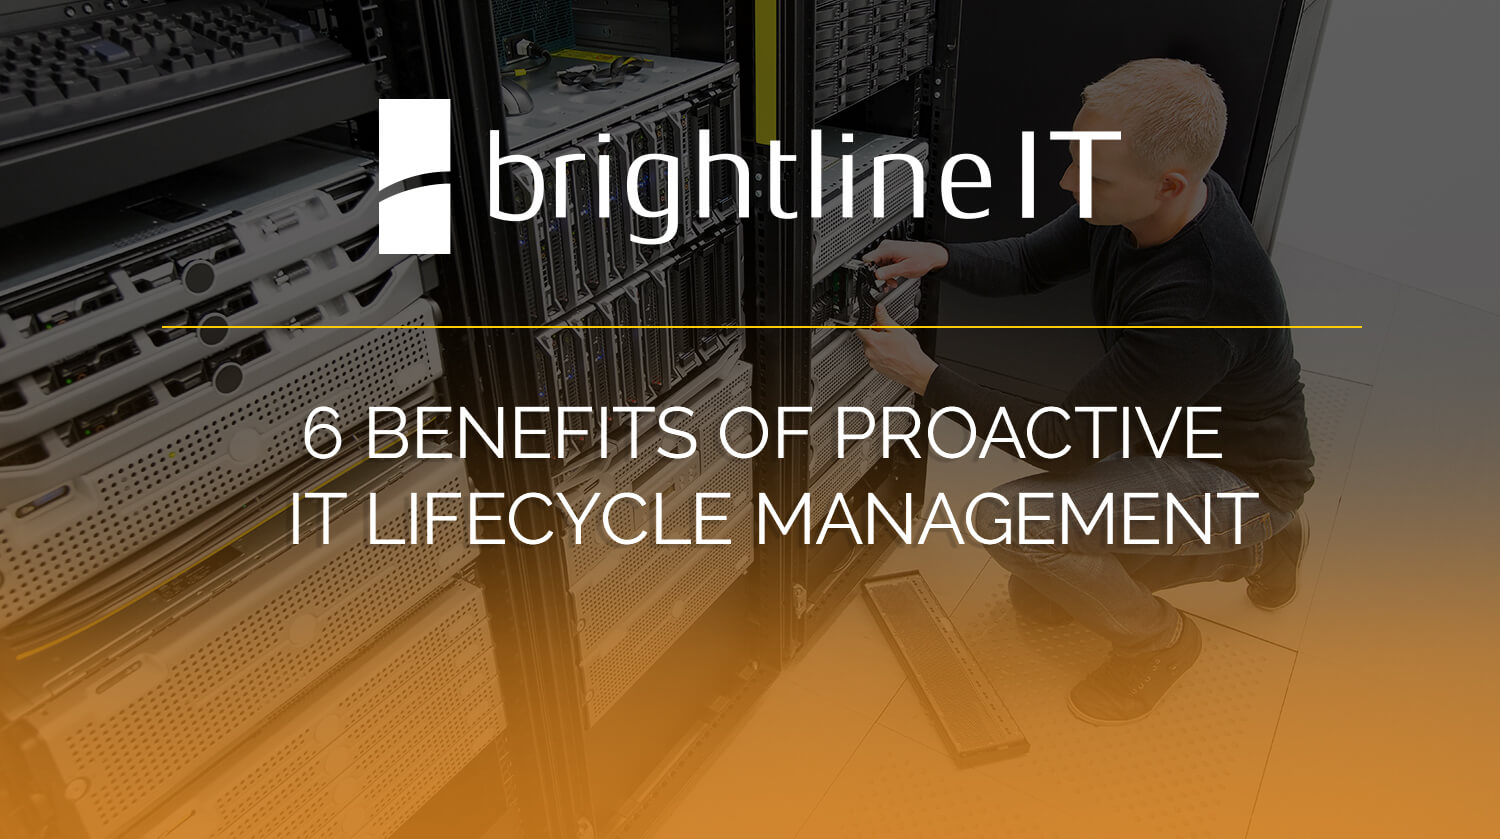 6 Benefits of Proactive IT Lifecycle Management